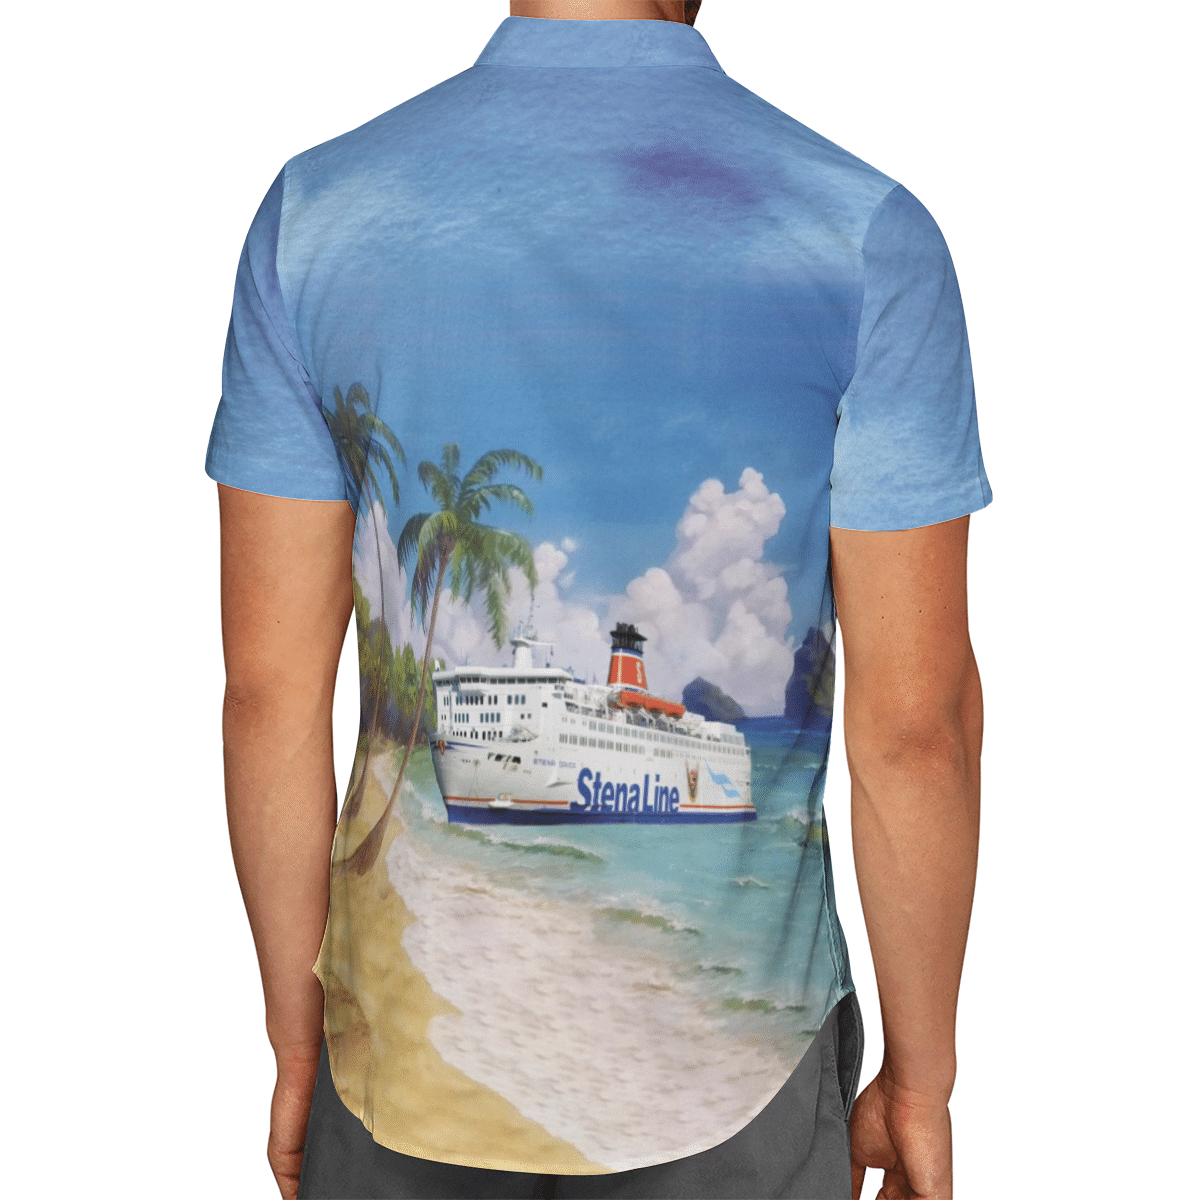 Going to the beach with a quality shirt 166